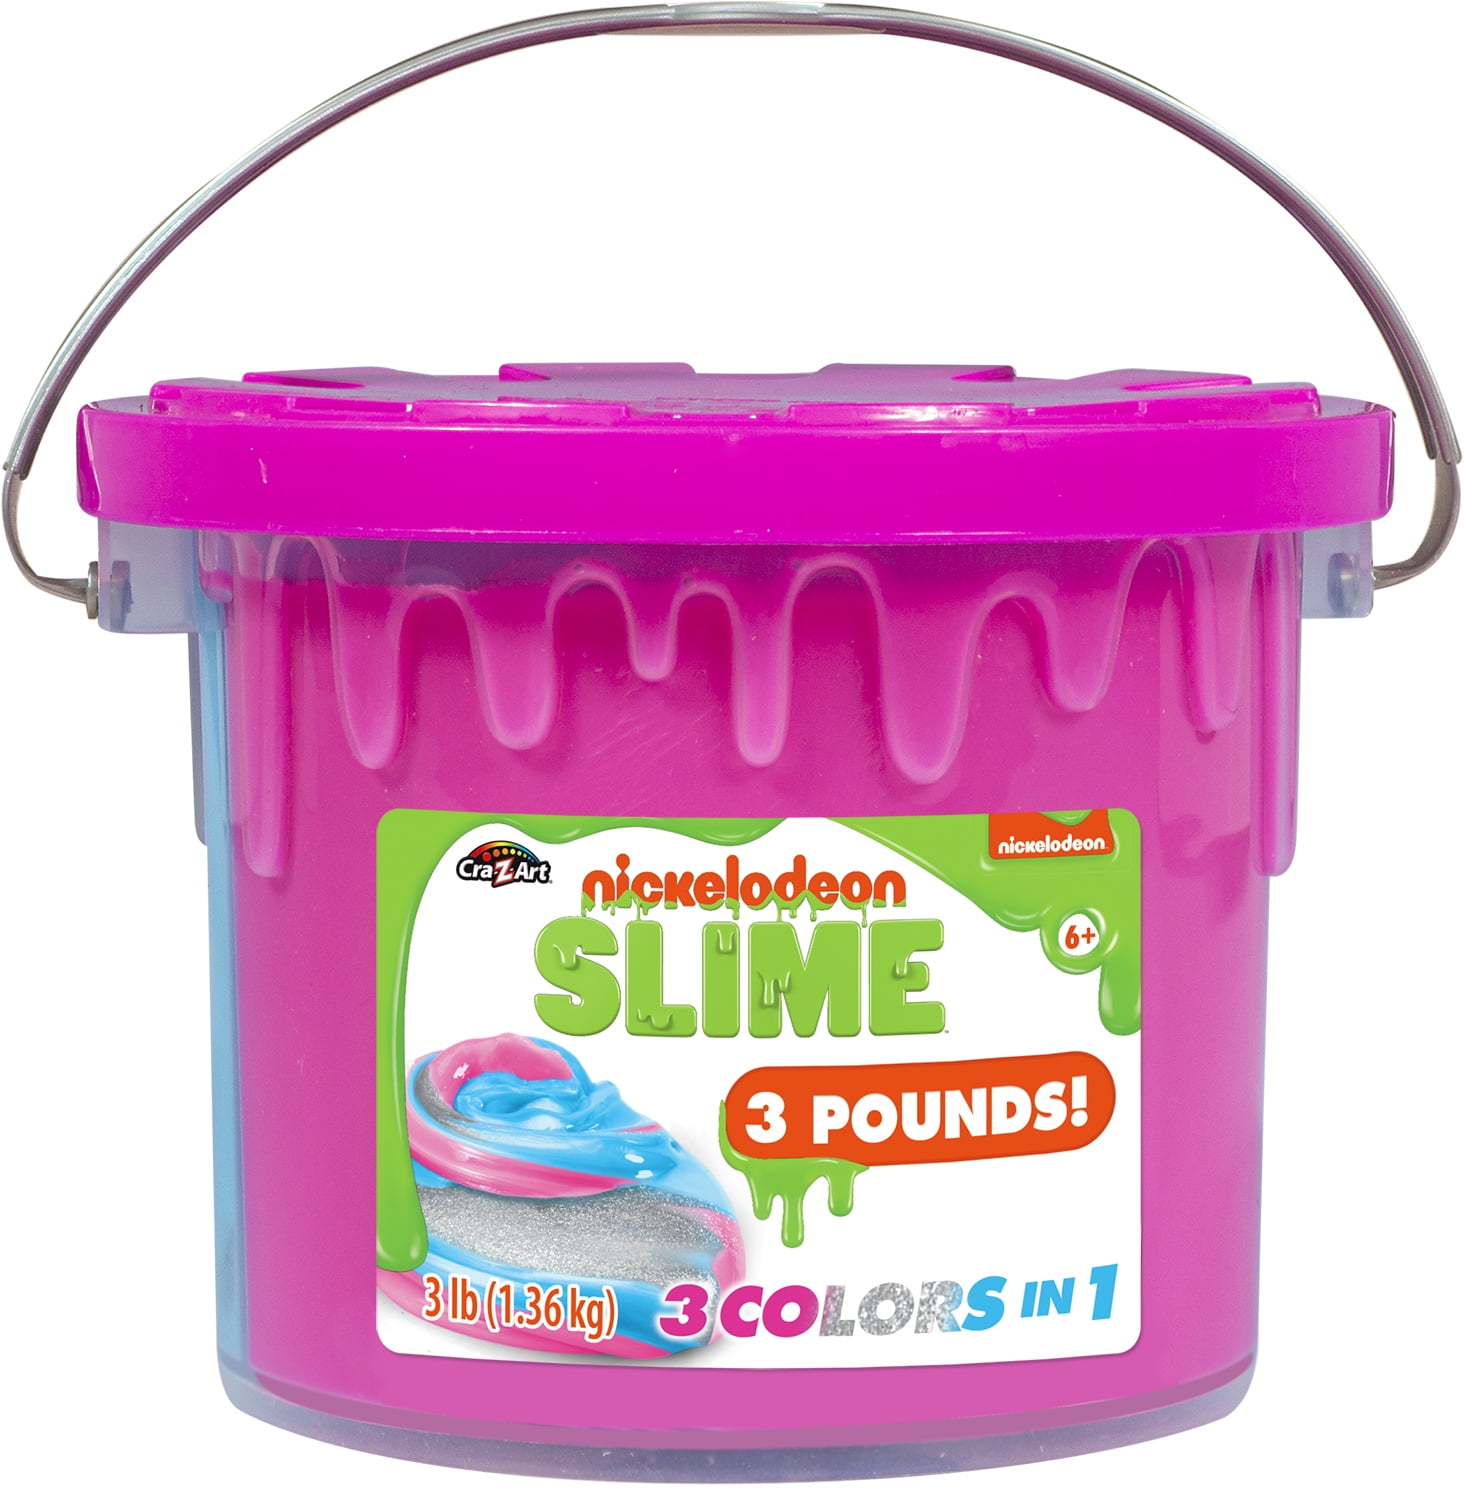 Nickelodeon Slime Bubble Blower Includes Real Slim New 